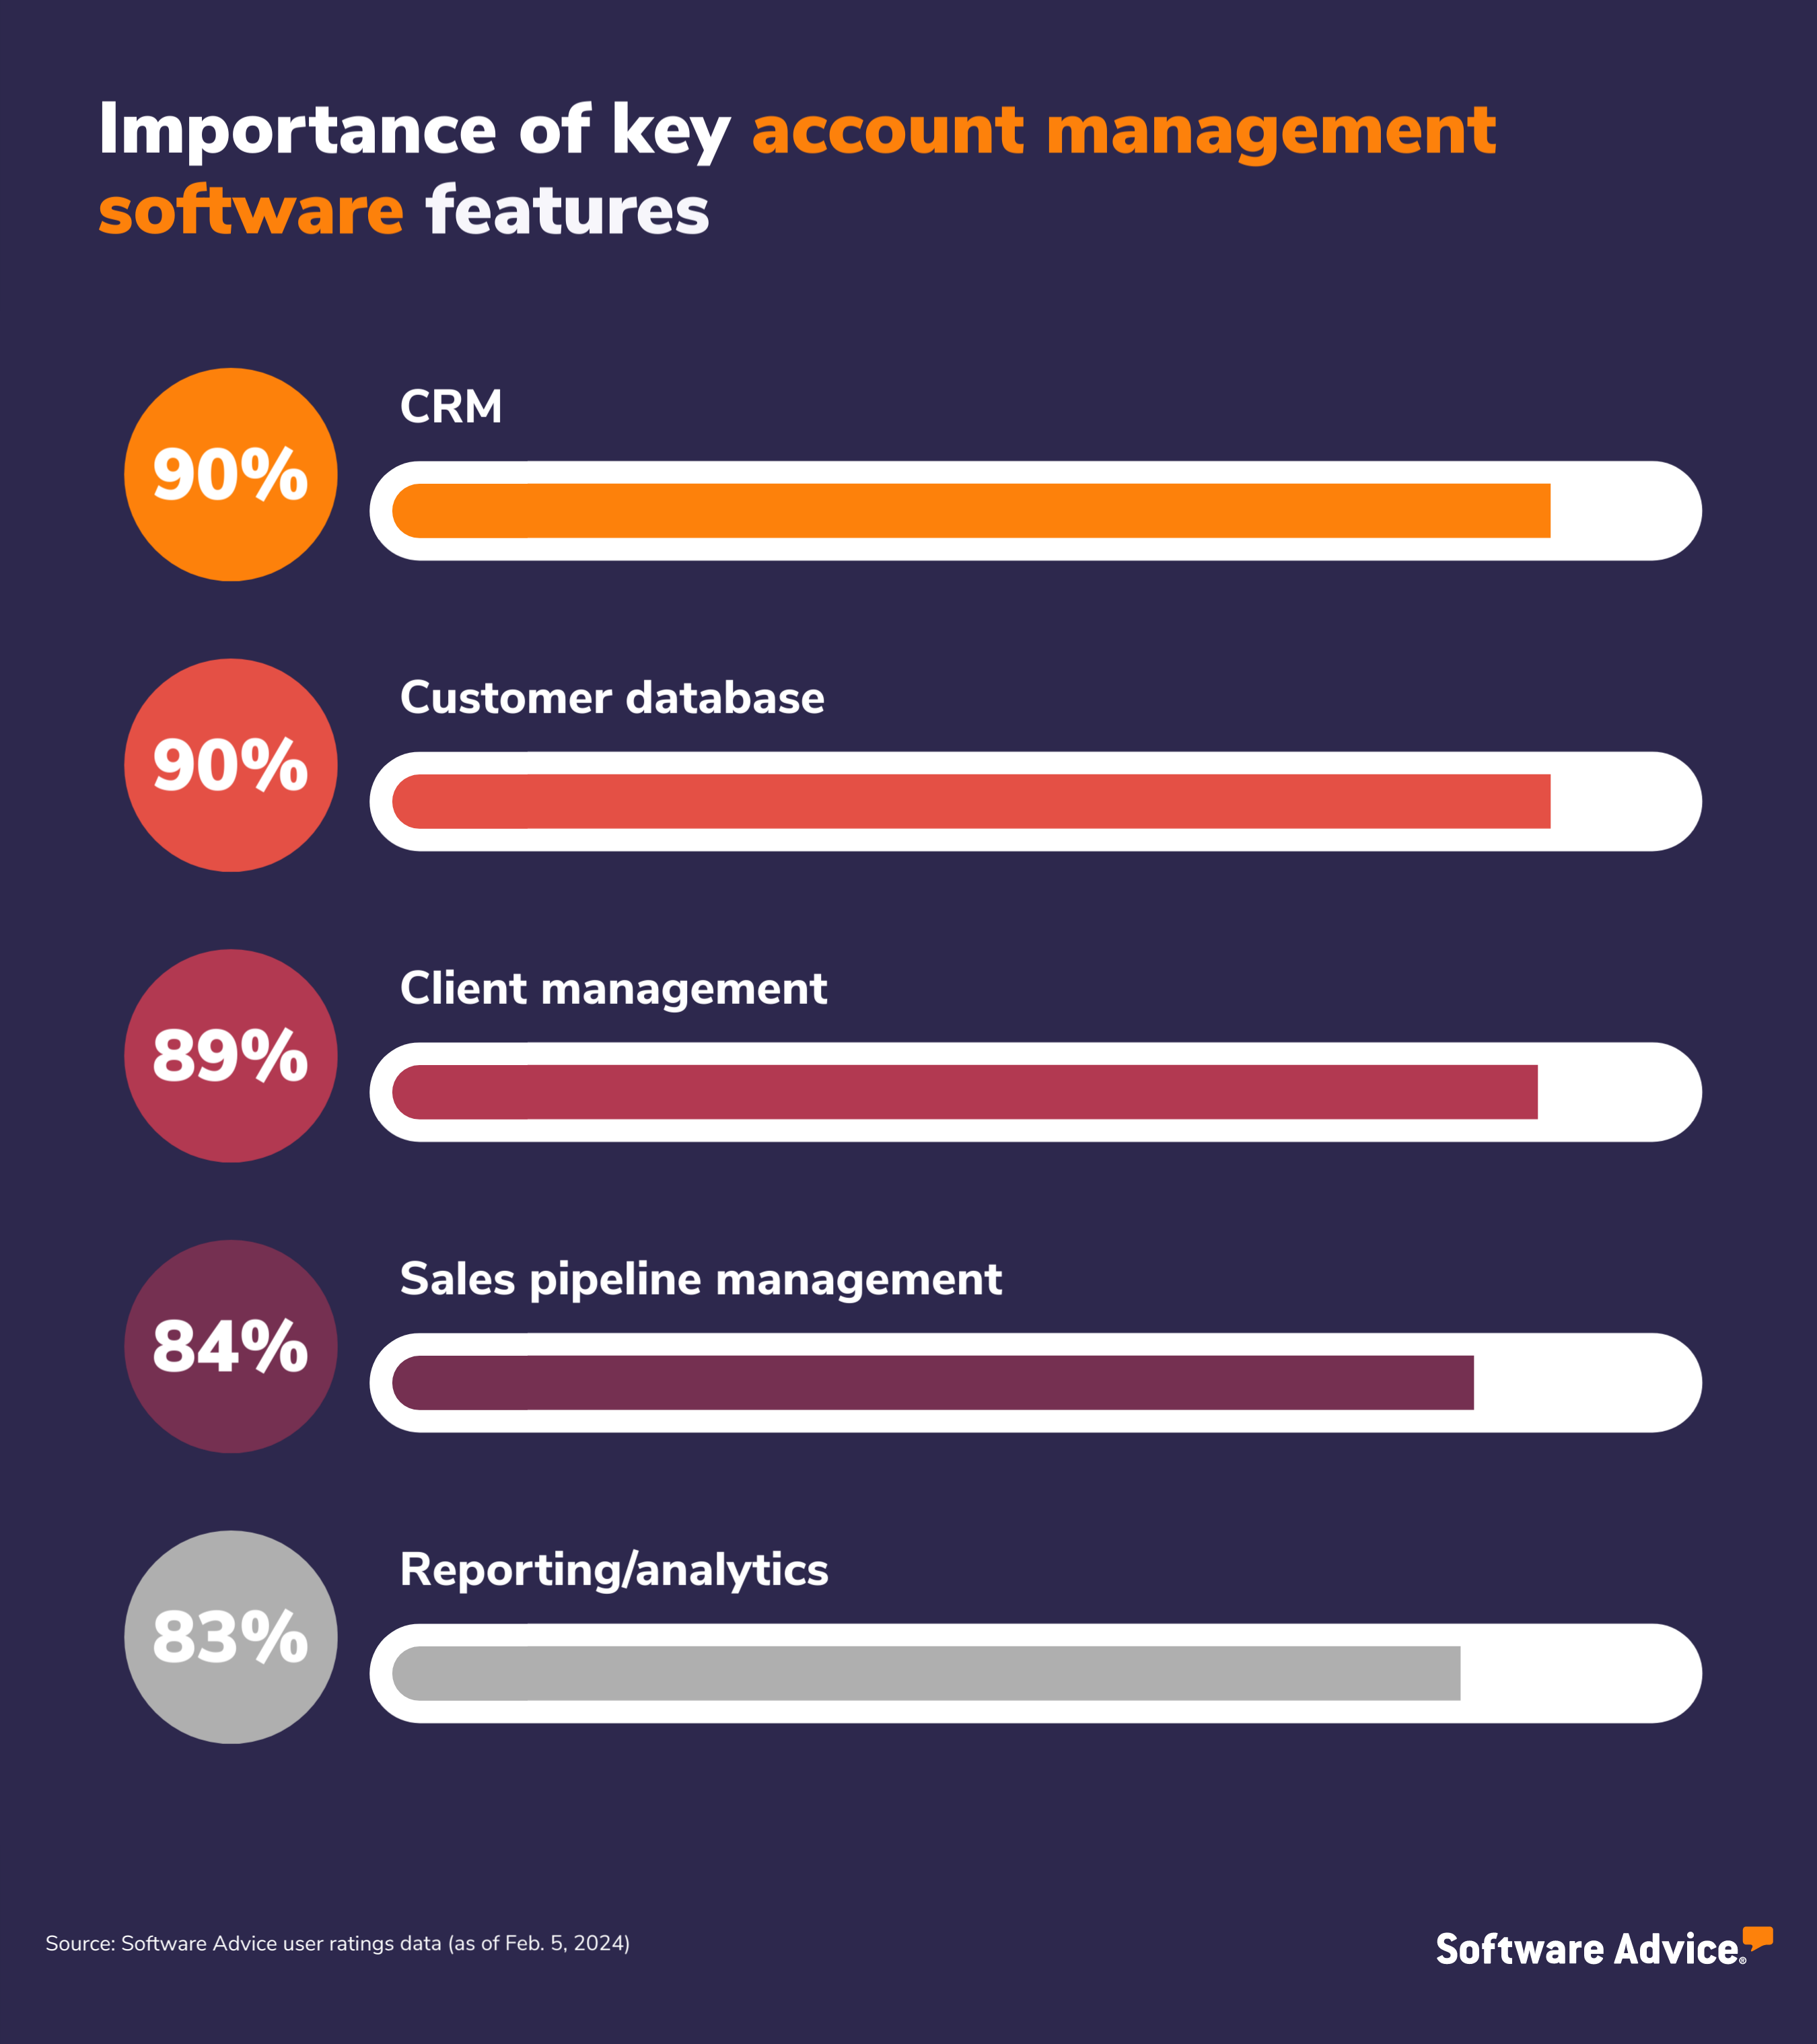 Key account management software features